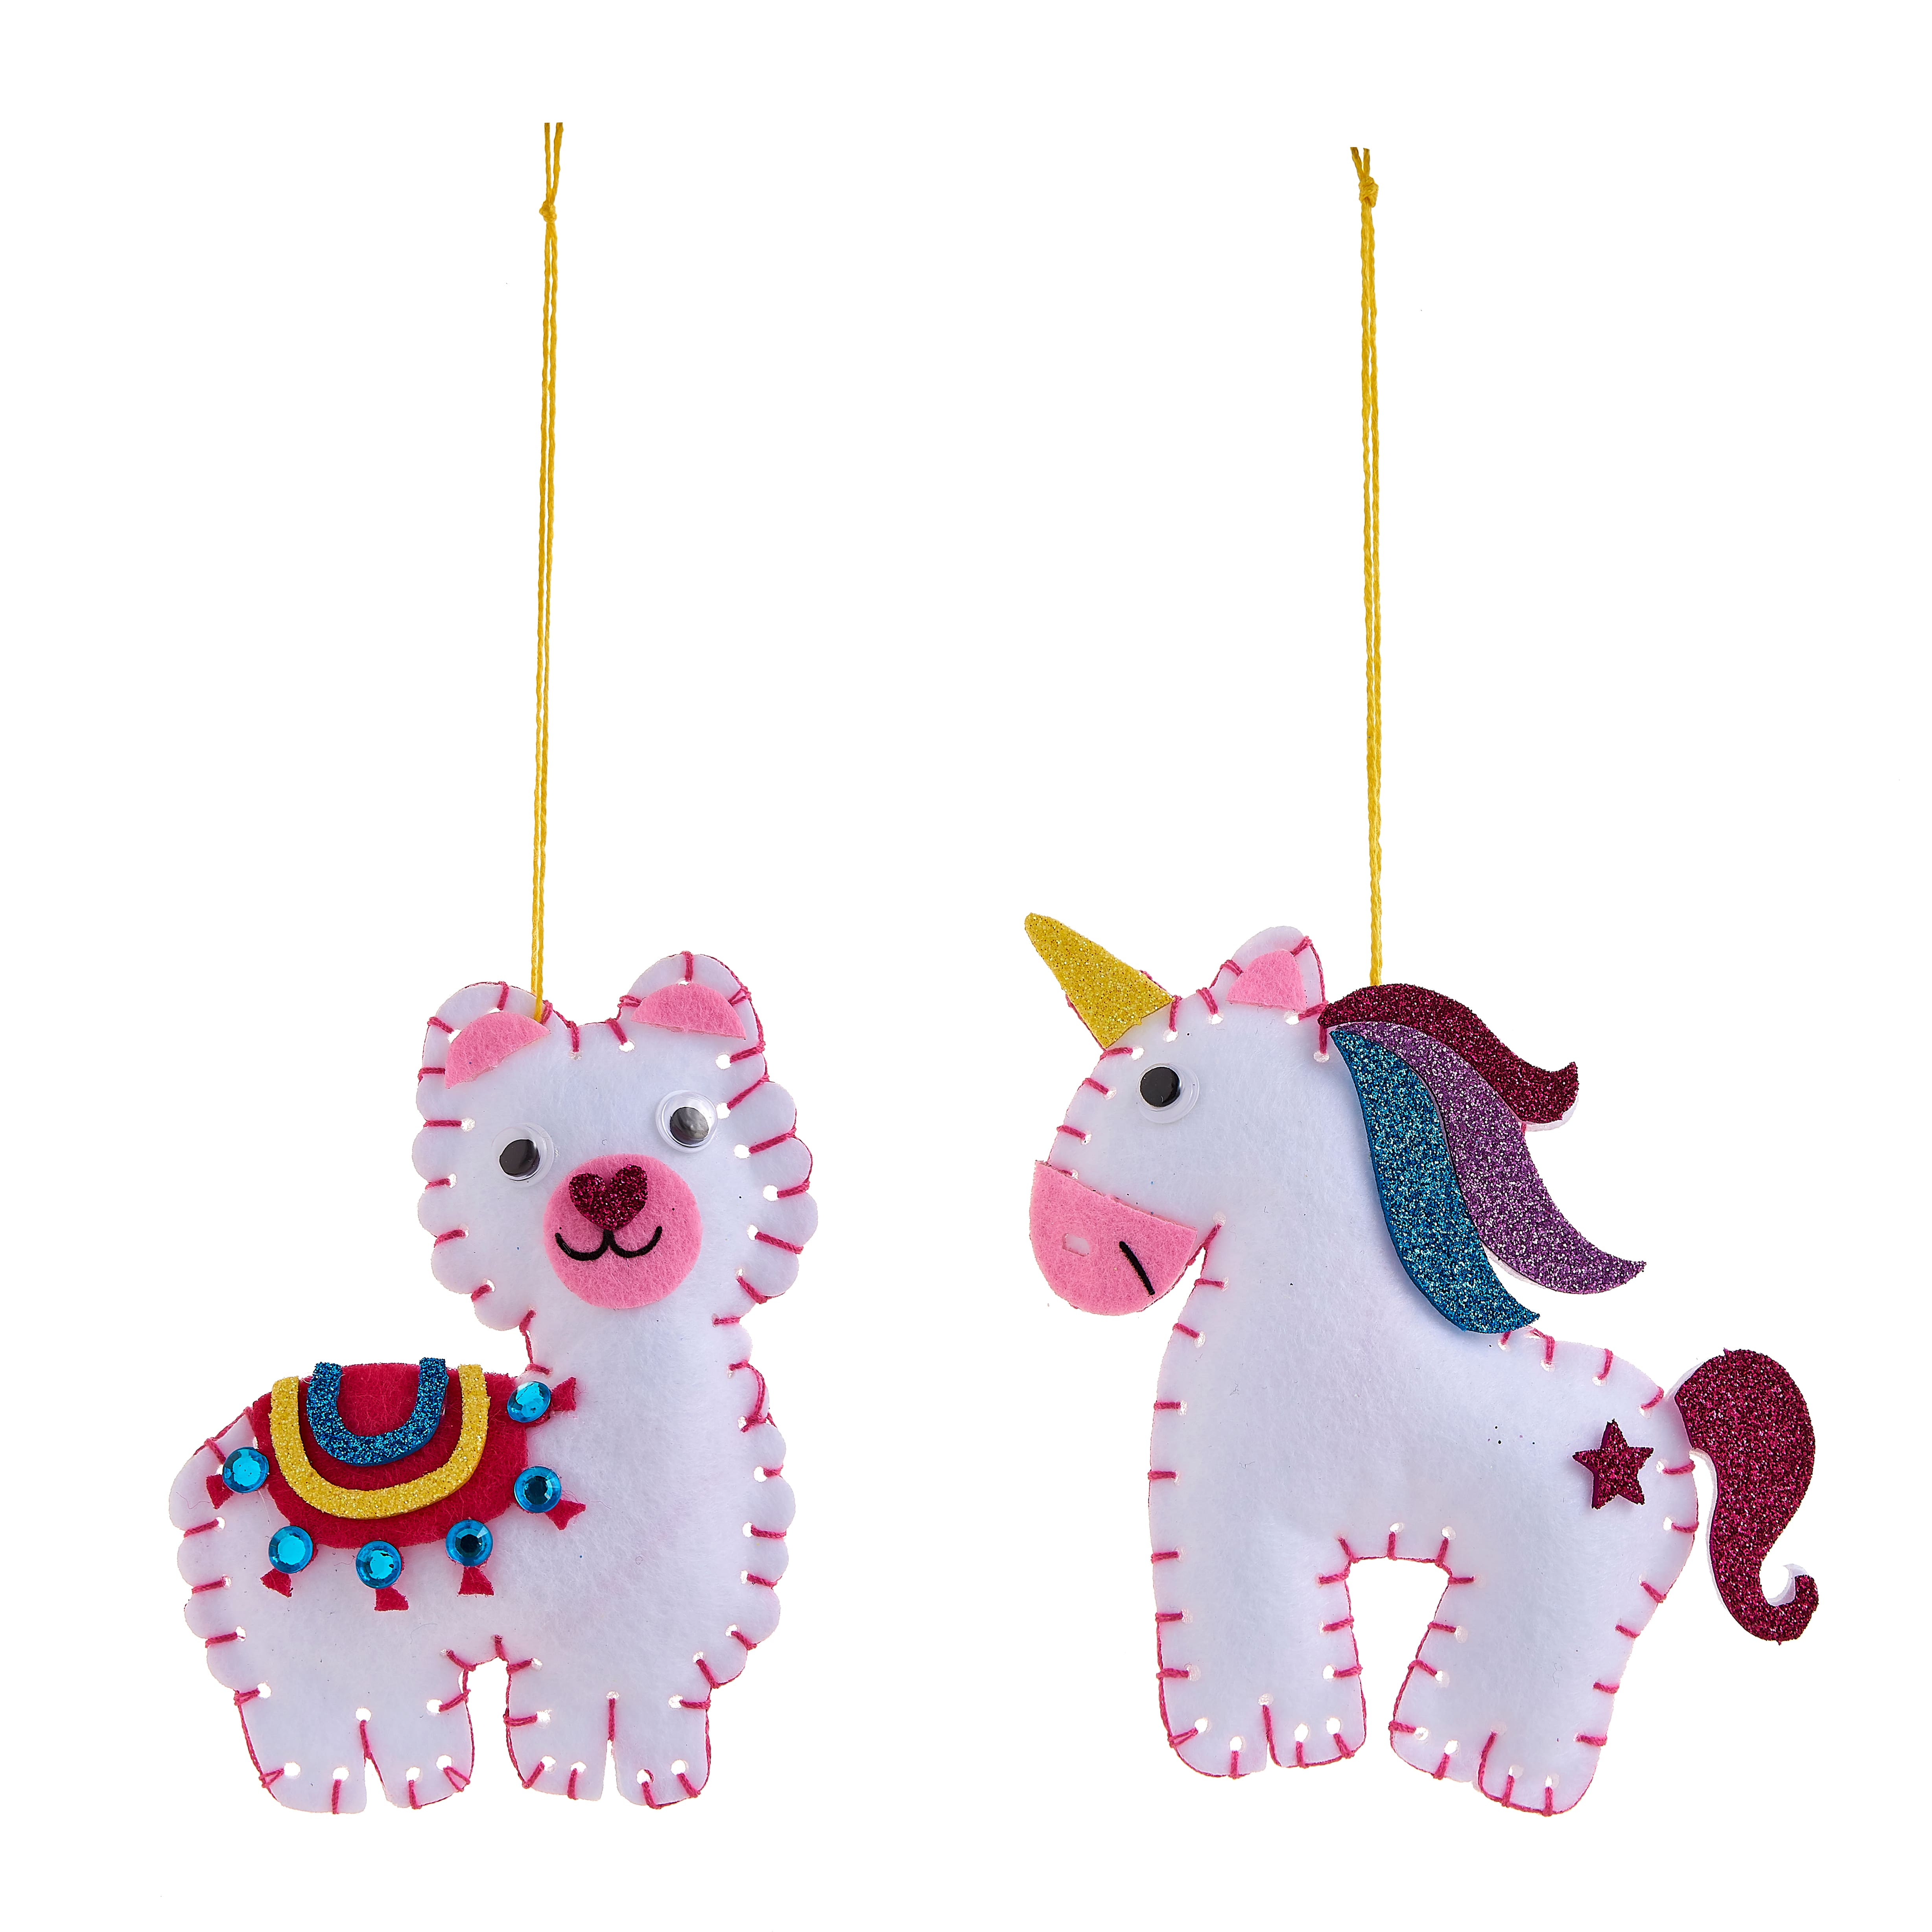  HKKYO Arts and Crafts for Kids Ages 8-12, Llama Sewing Kit for  Kids, Make Your Own Stuffed Animal Kit, Alpaca Craft Sewing Kit, DIY Plush  Craft Supplies : Toys & Games